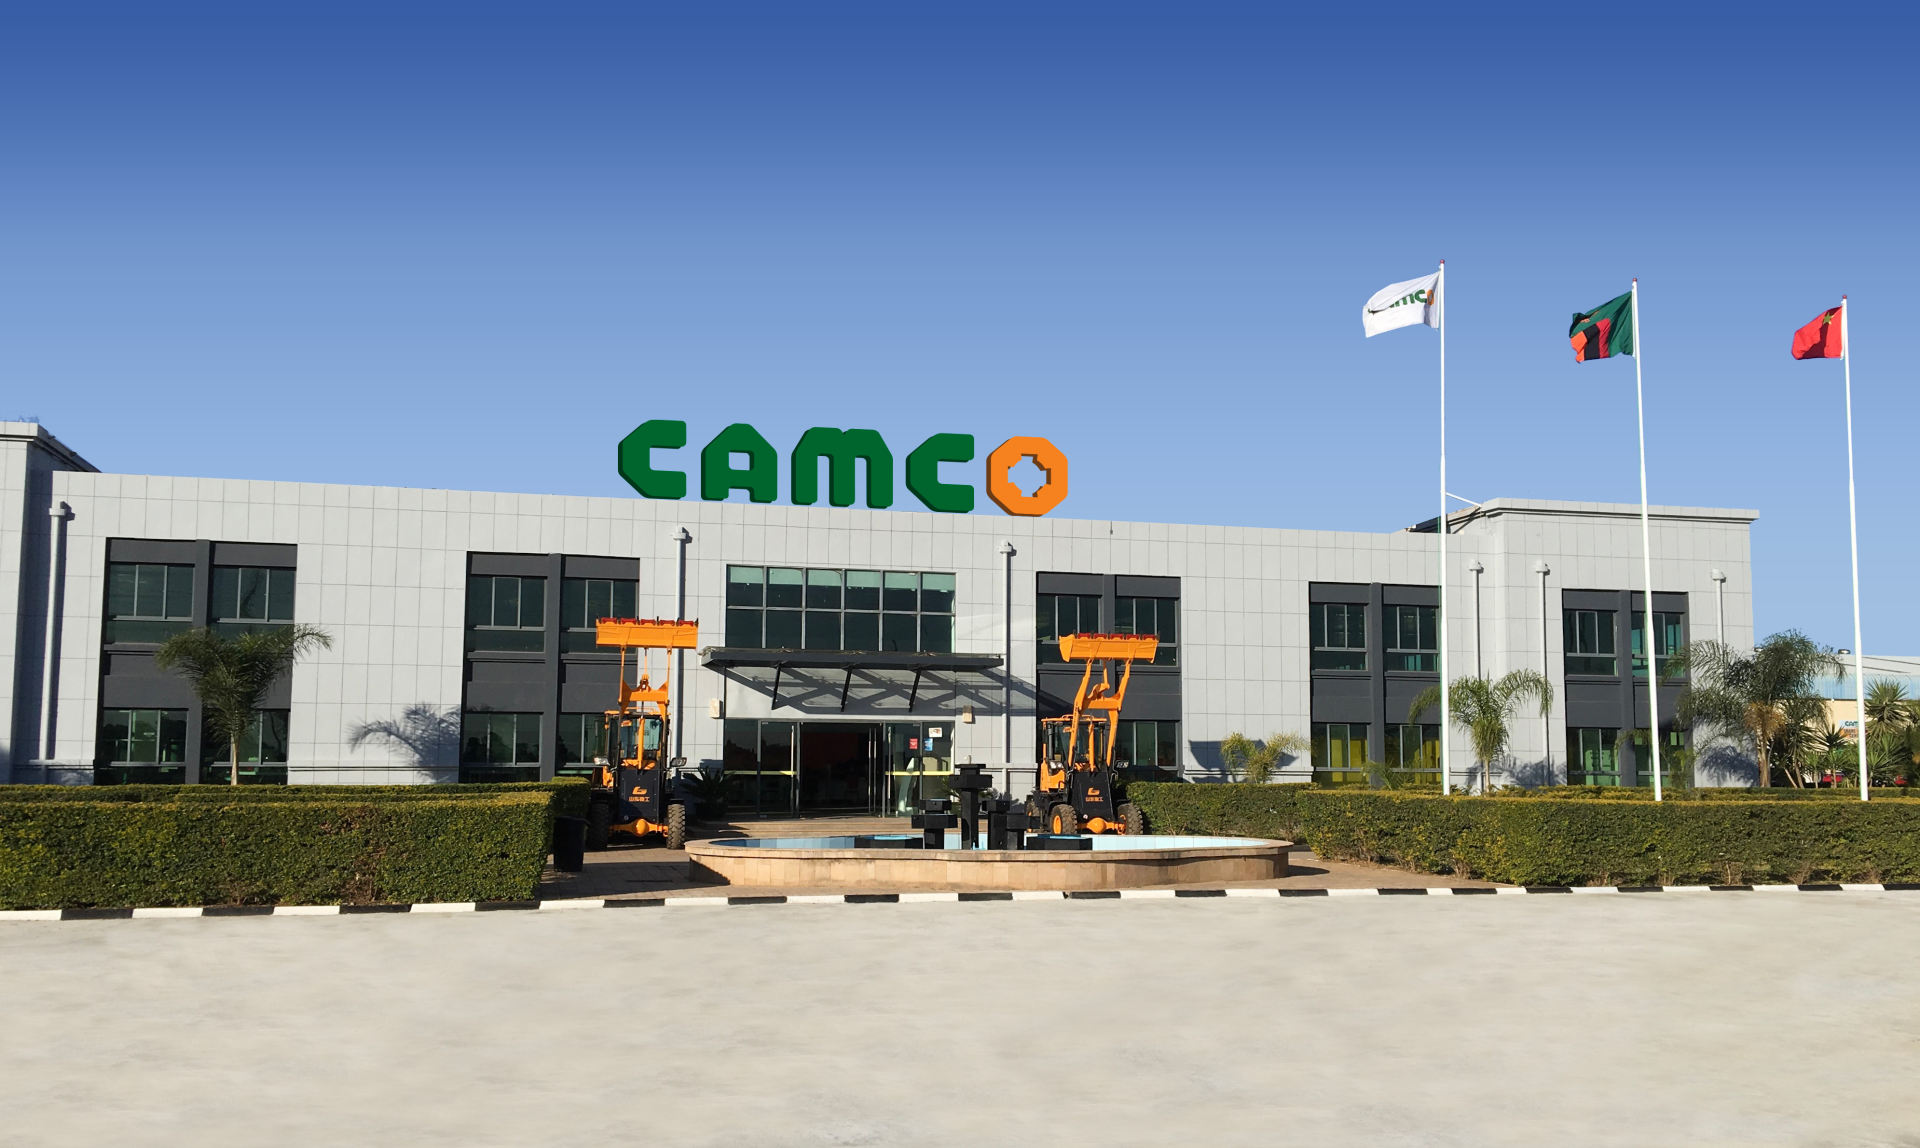 About CAMCO Group